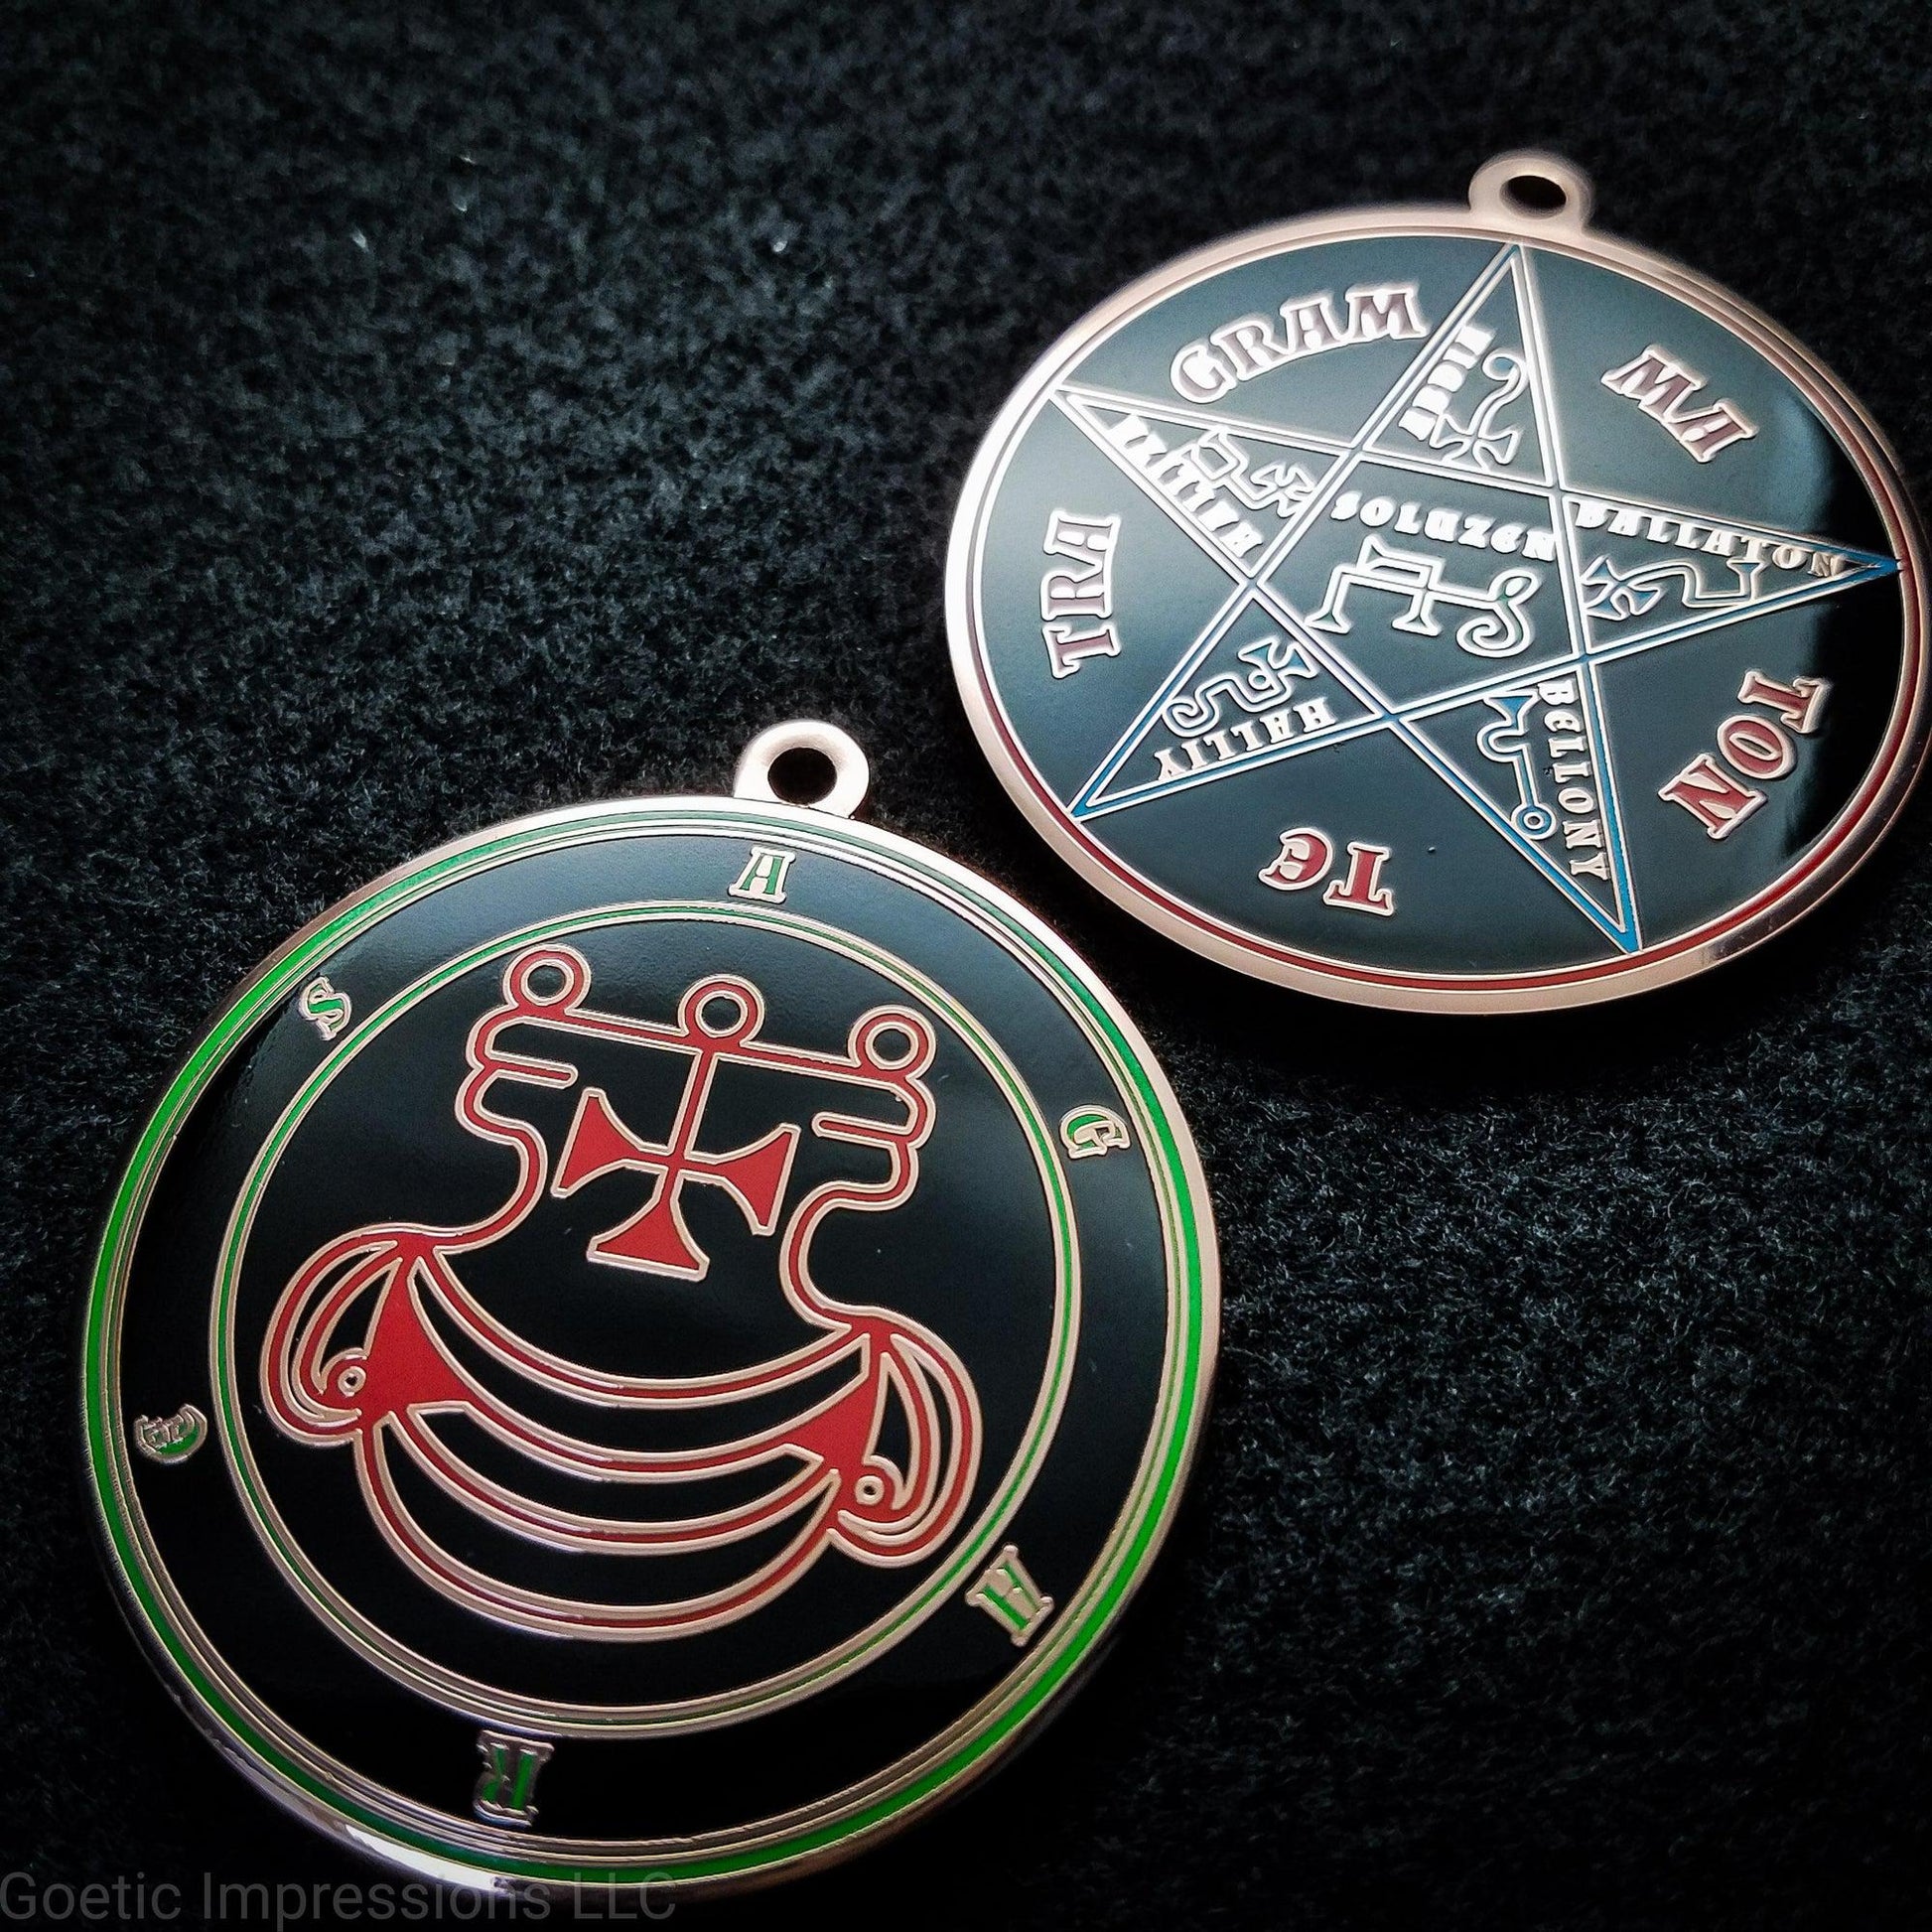 Ars Goetia Agares sigil medallion with Pentacle of Solomon on Reverse side